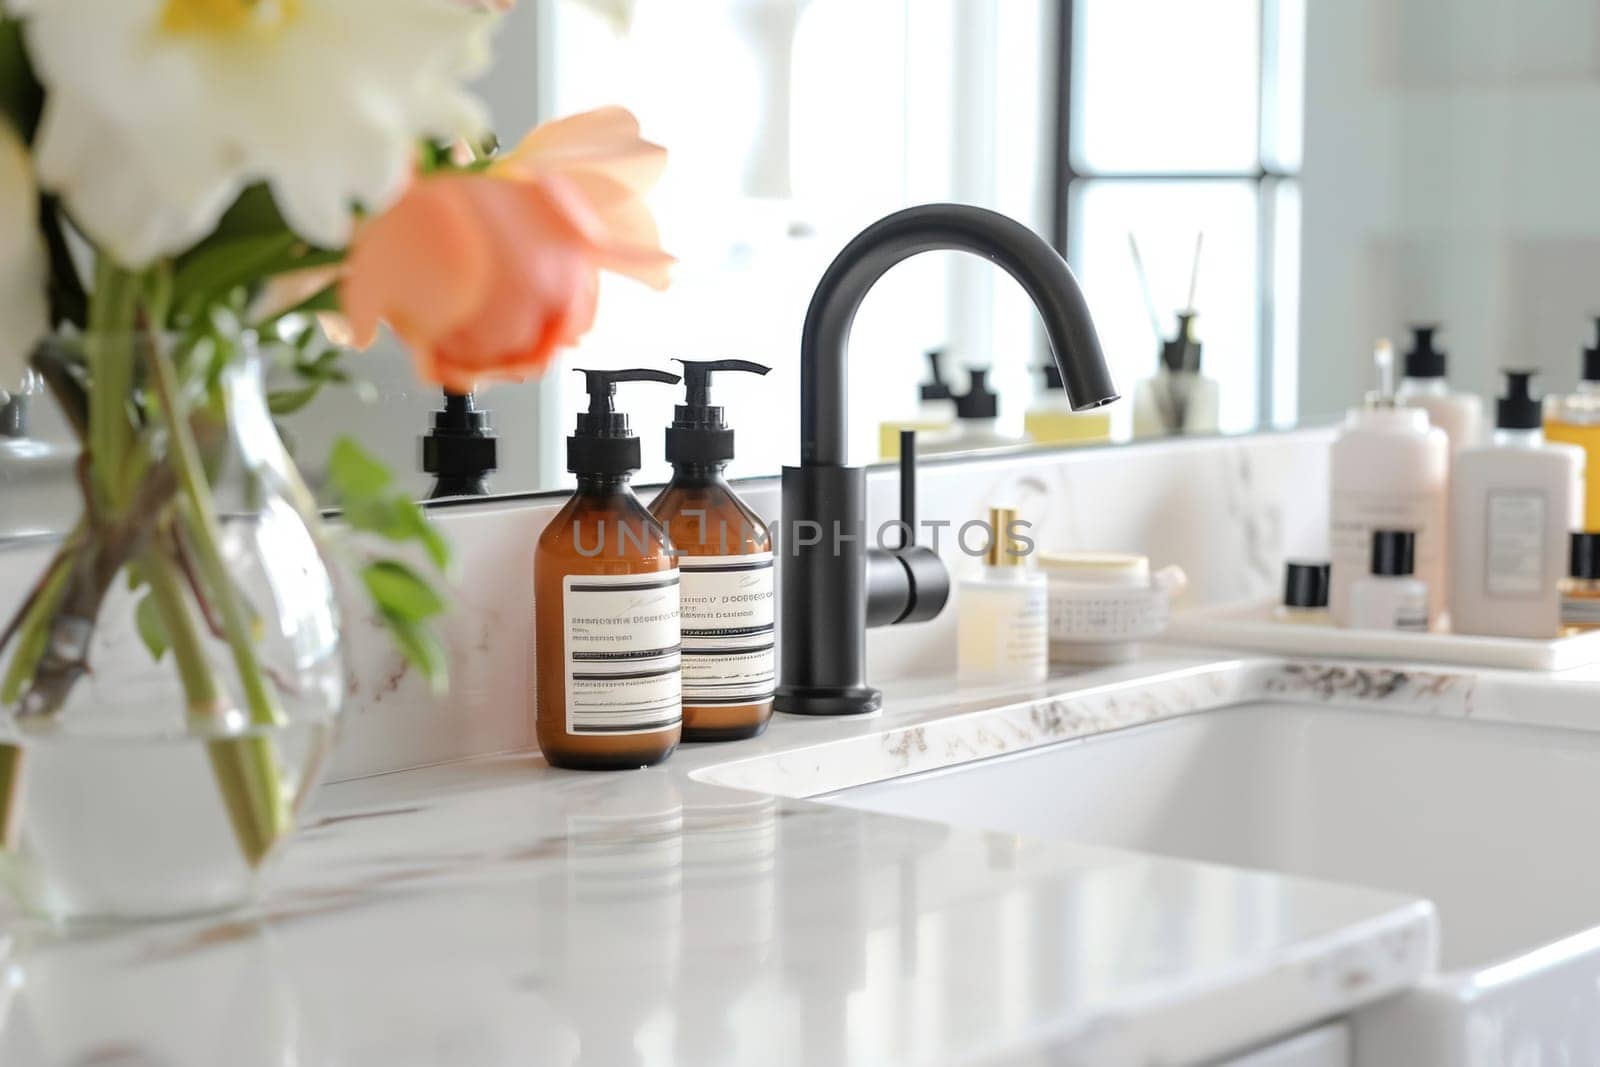 A clean, well-lit bathroom presents an elegant morning routine setup with fresh flowers and designer toiletries neatly arranged by the sink